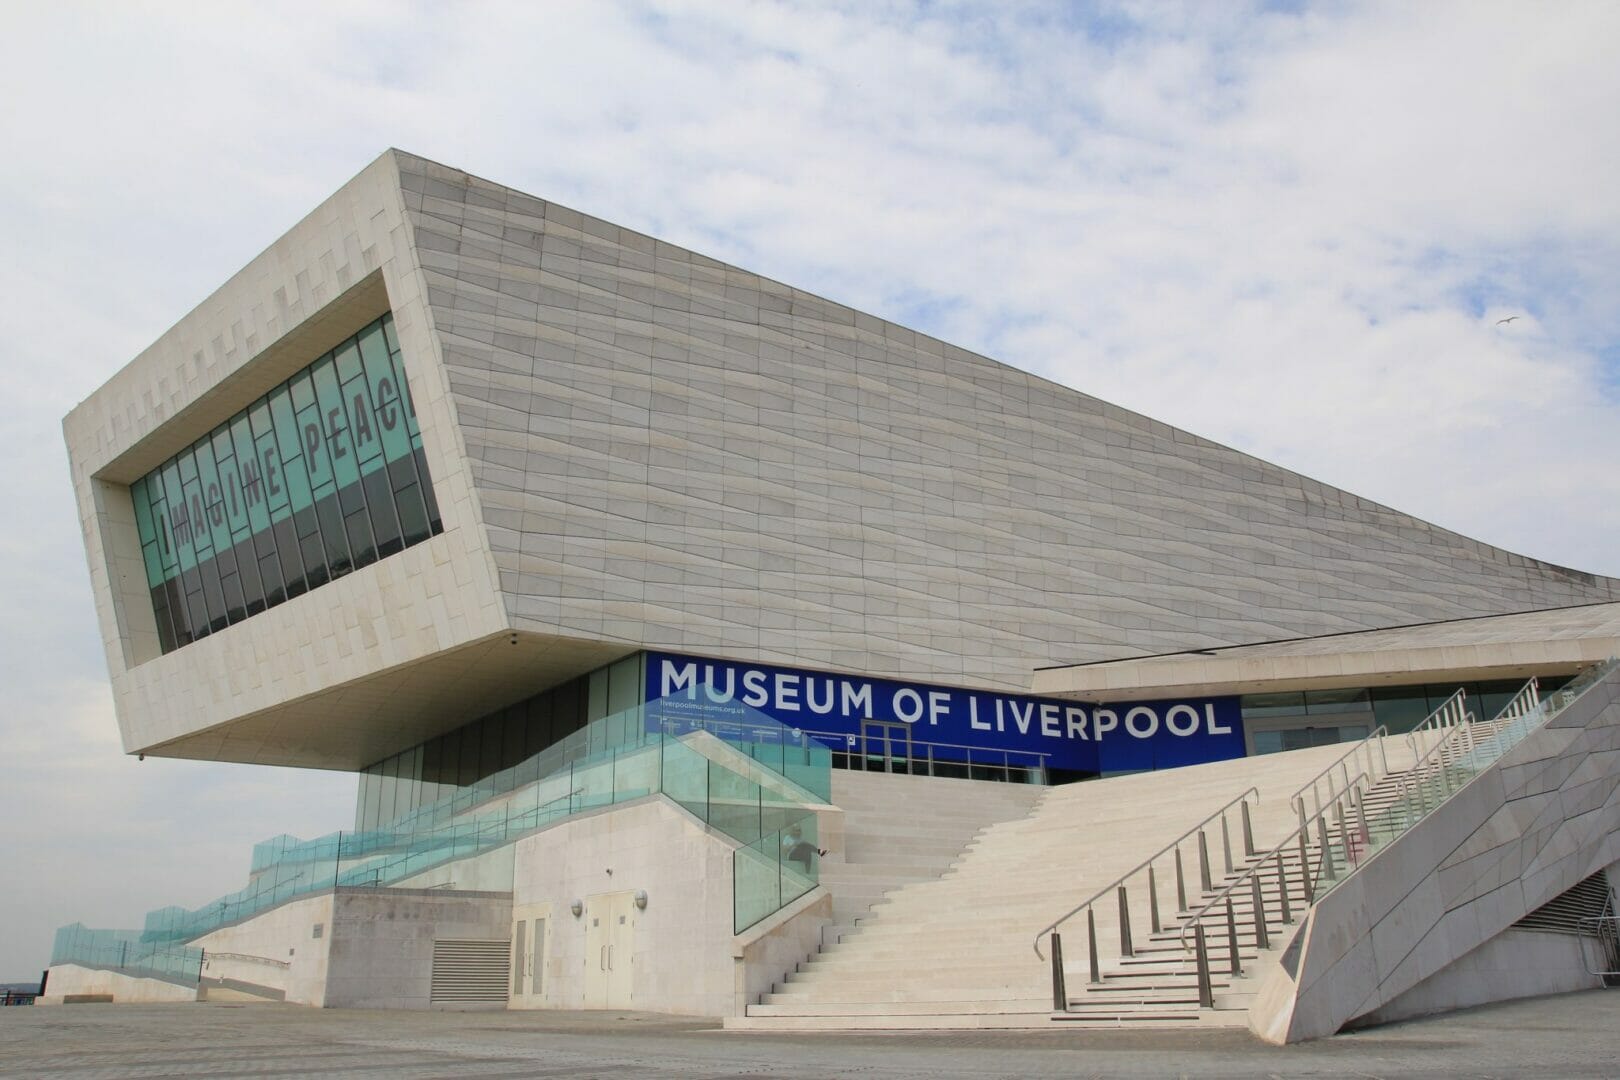 KEMPER SYSTEM ON DISPLAY AT MUSEUM OF LIVERPOOL